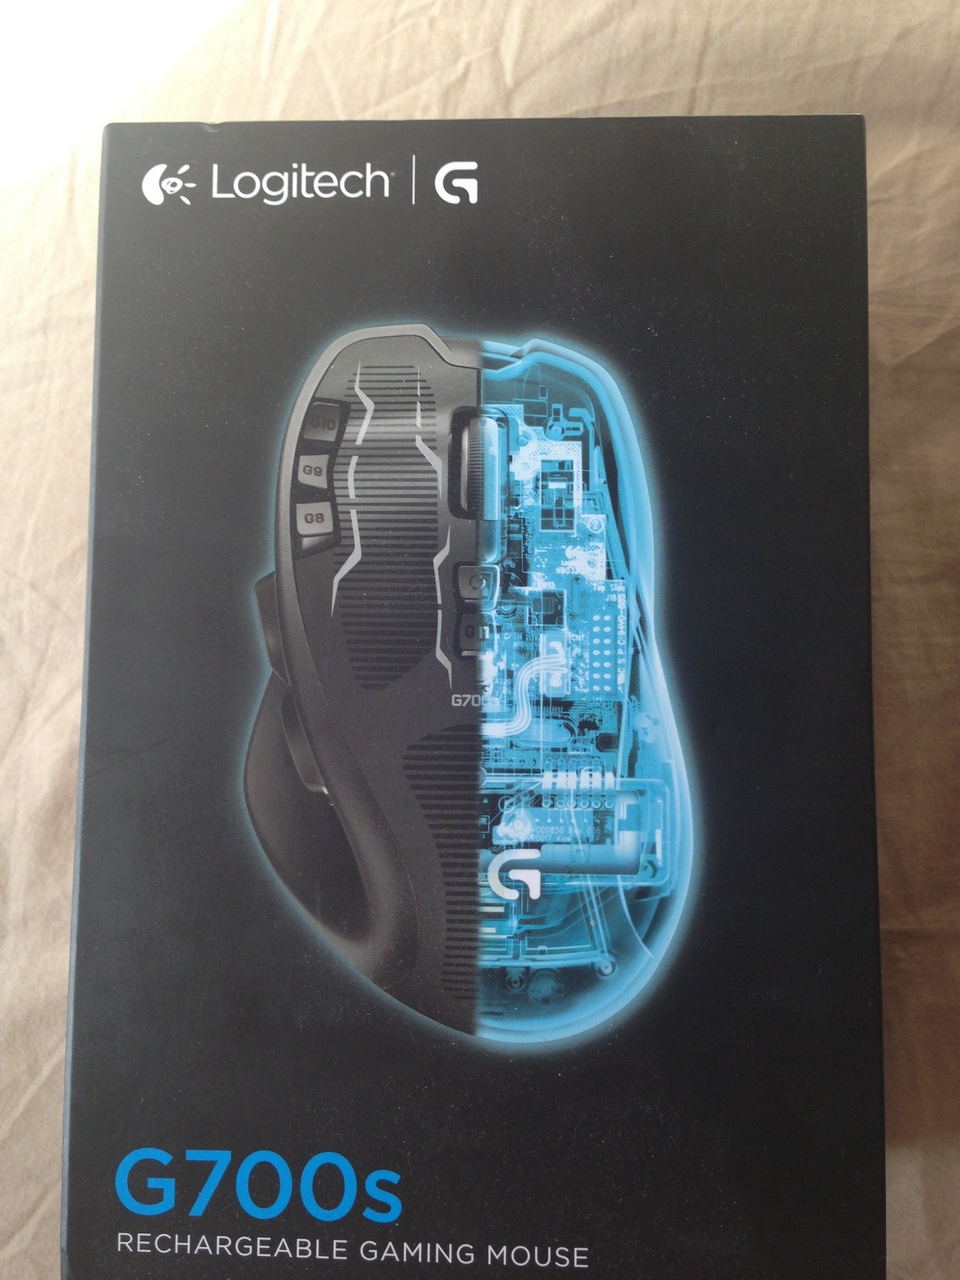 Logitech g700s rechargeable gaming mouse